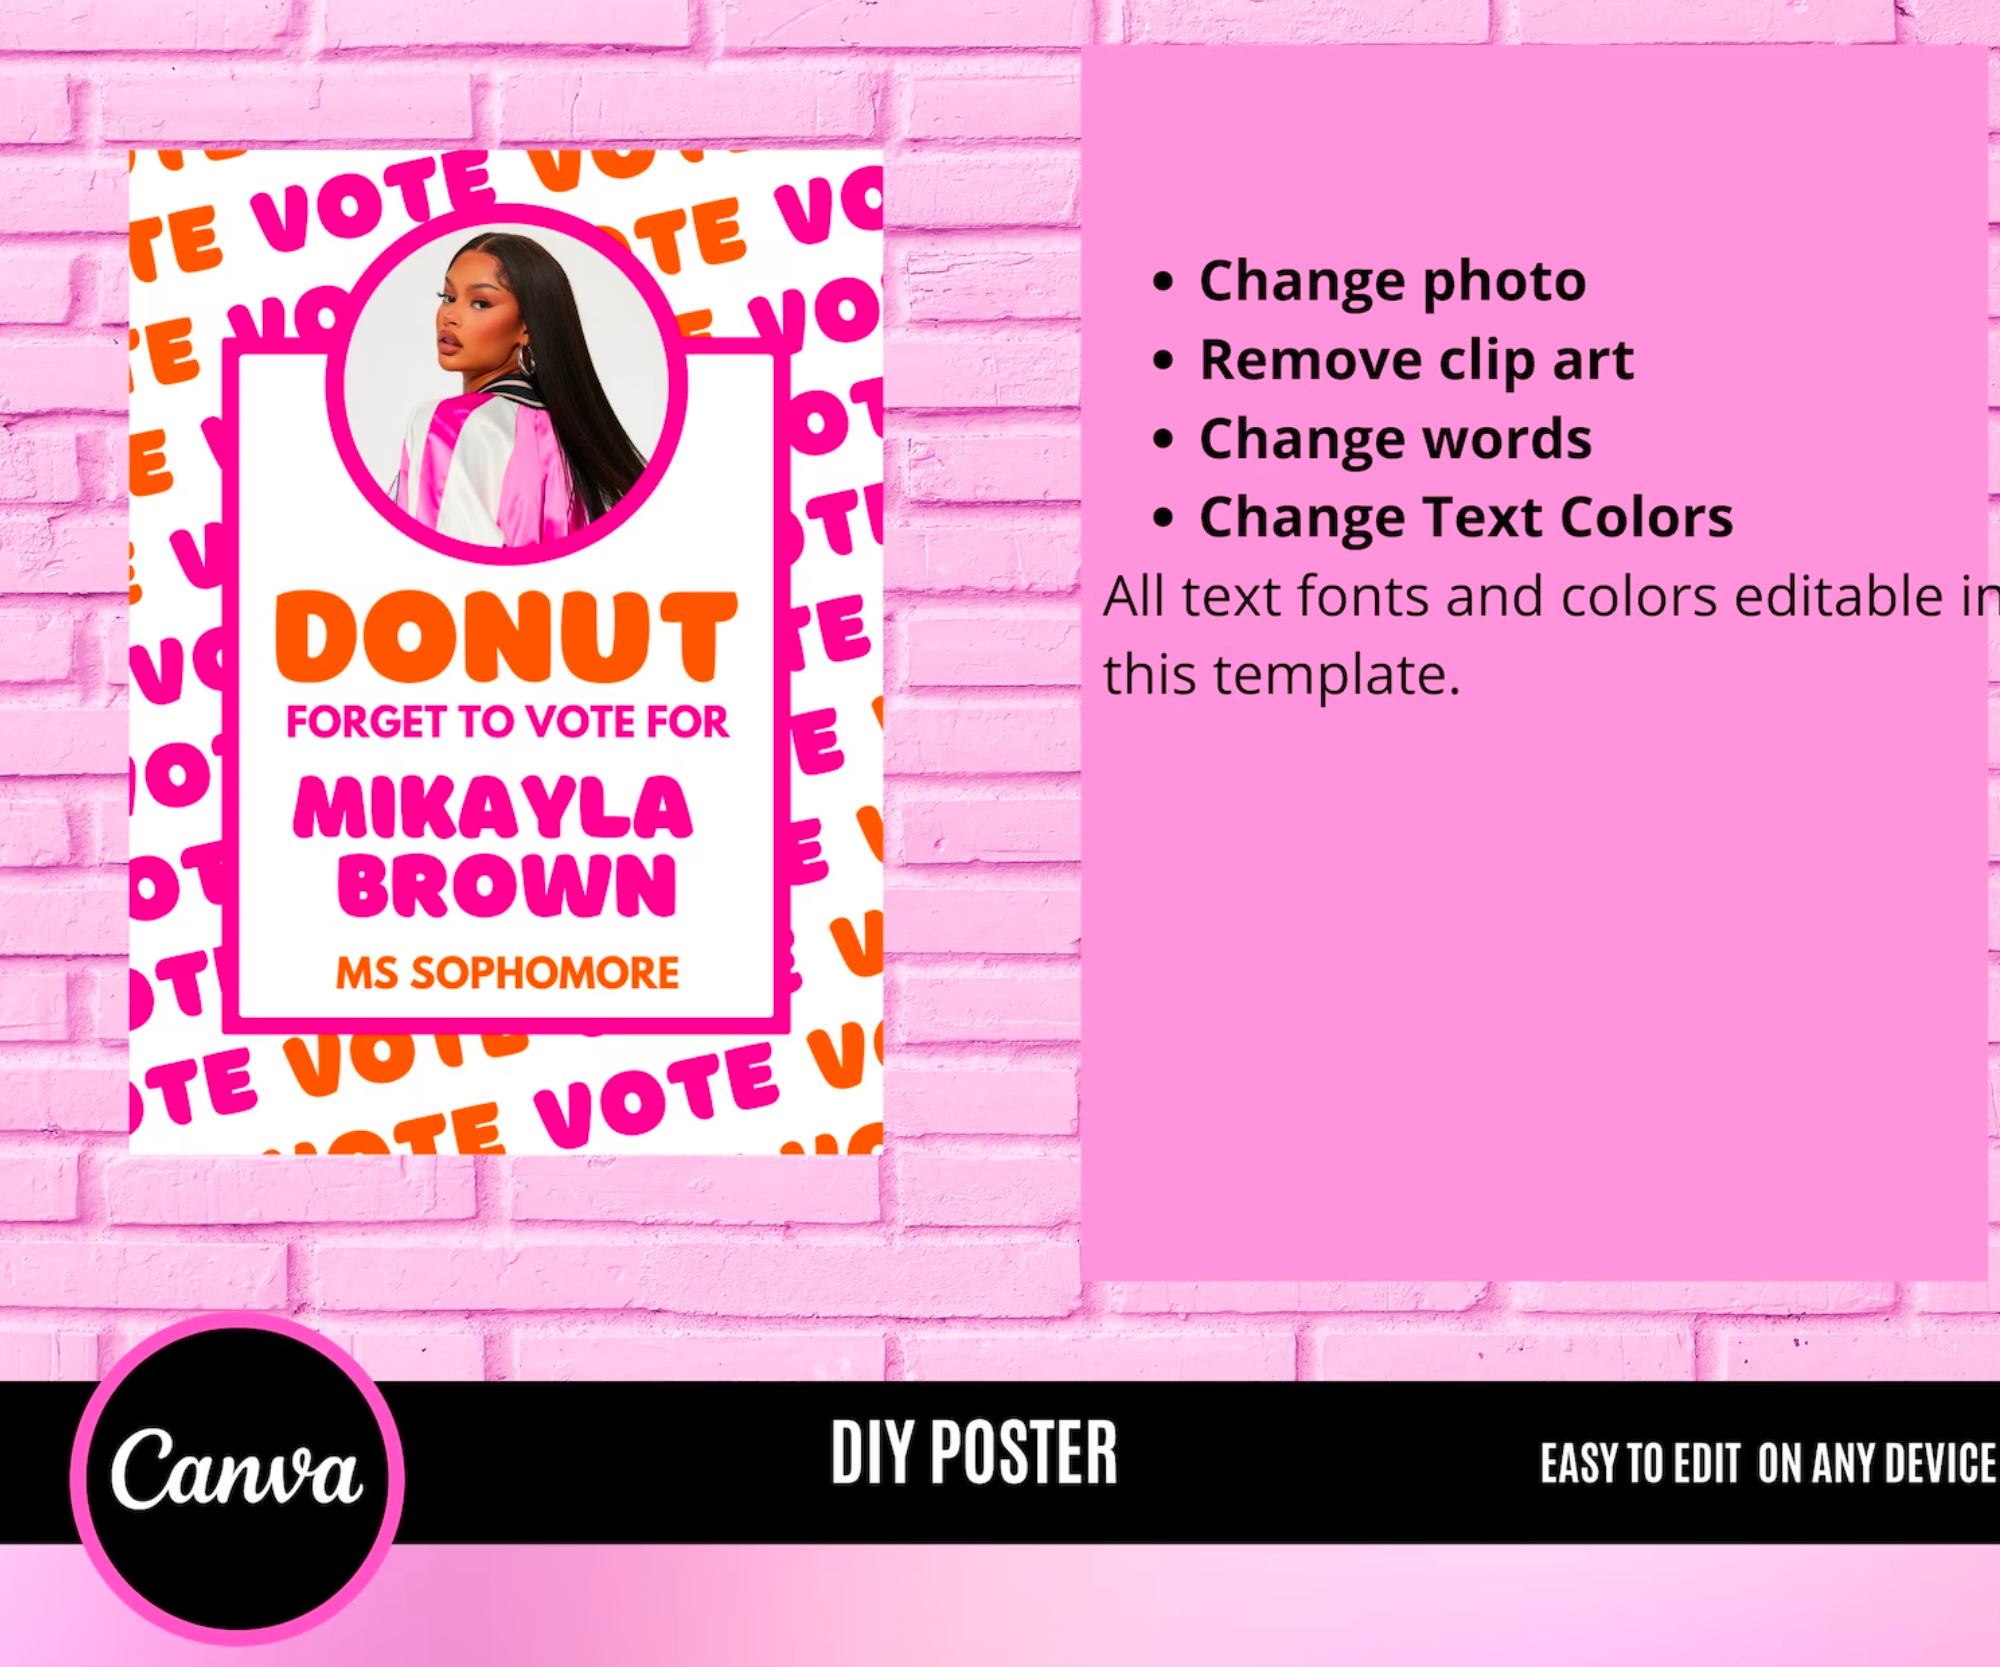 Donut Forget to Vote Campaign Poster